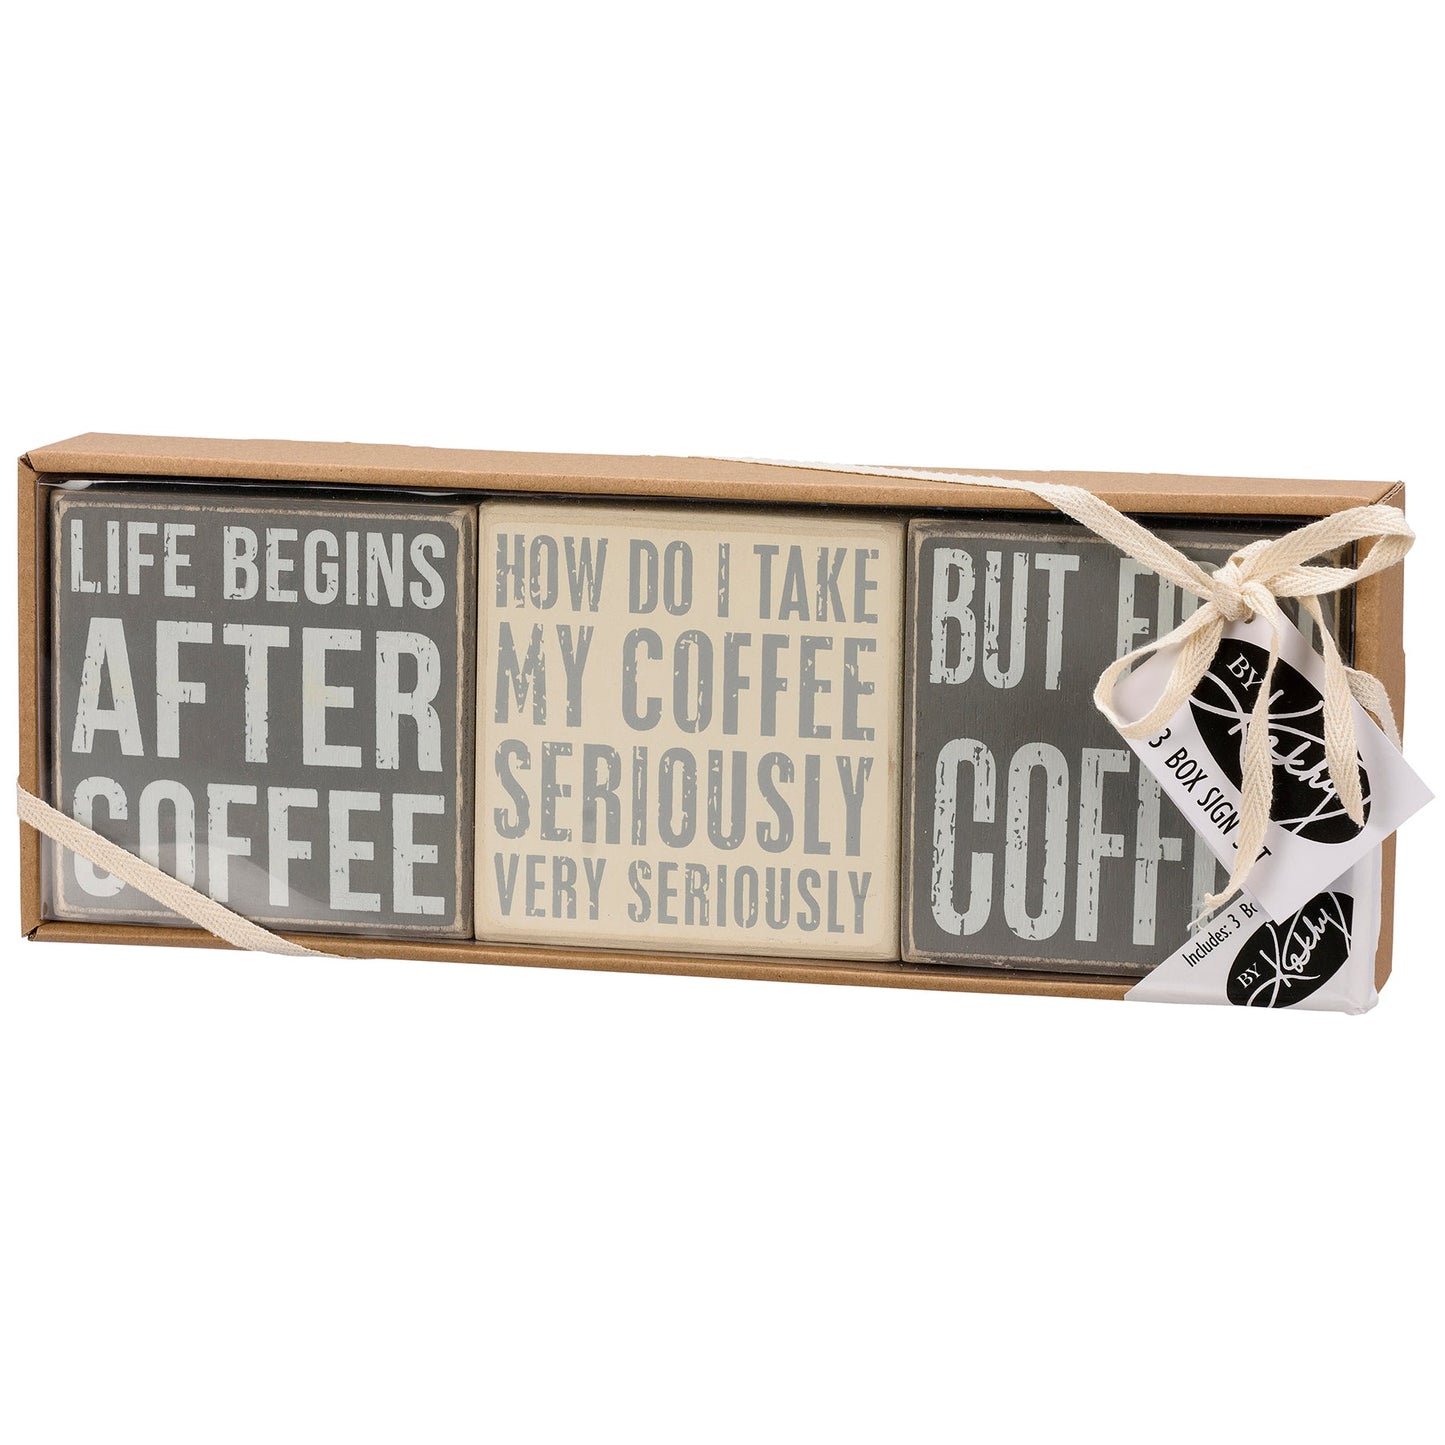 After Coffee Box Sign Set | Wall Desk Display Gift Set | 4" x 4"